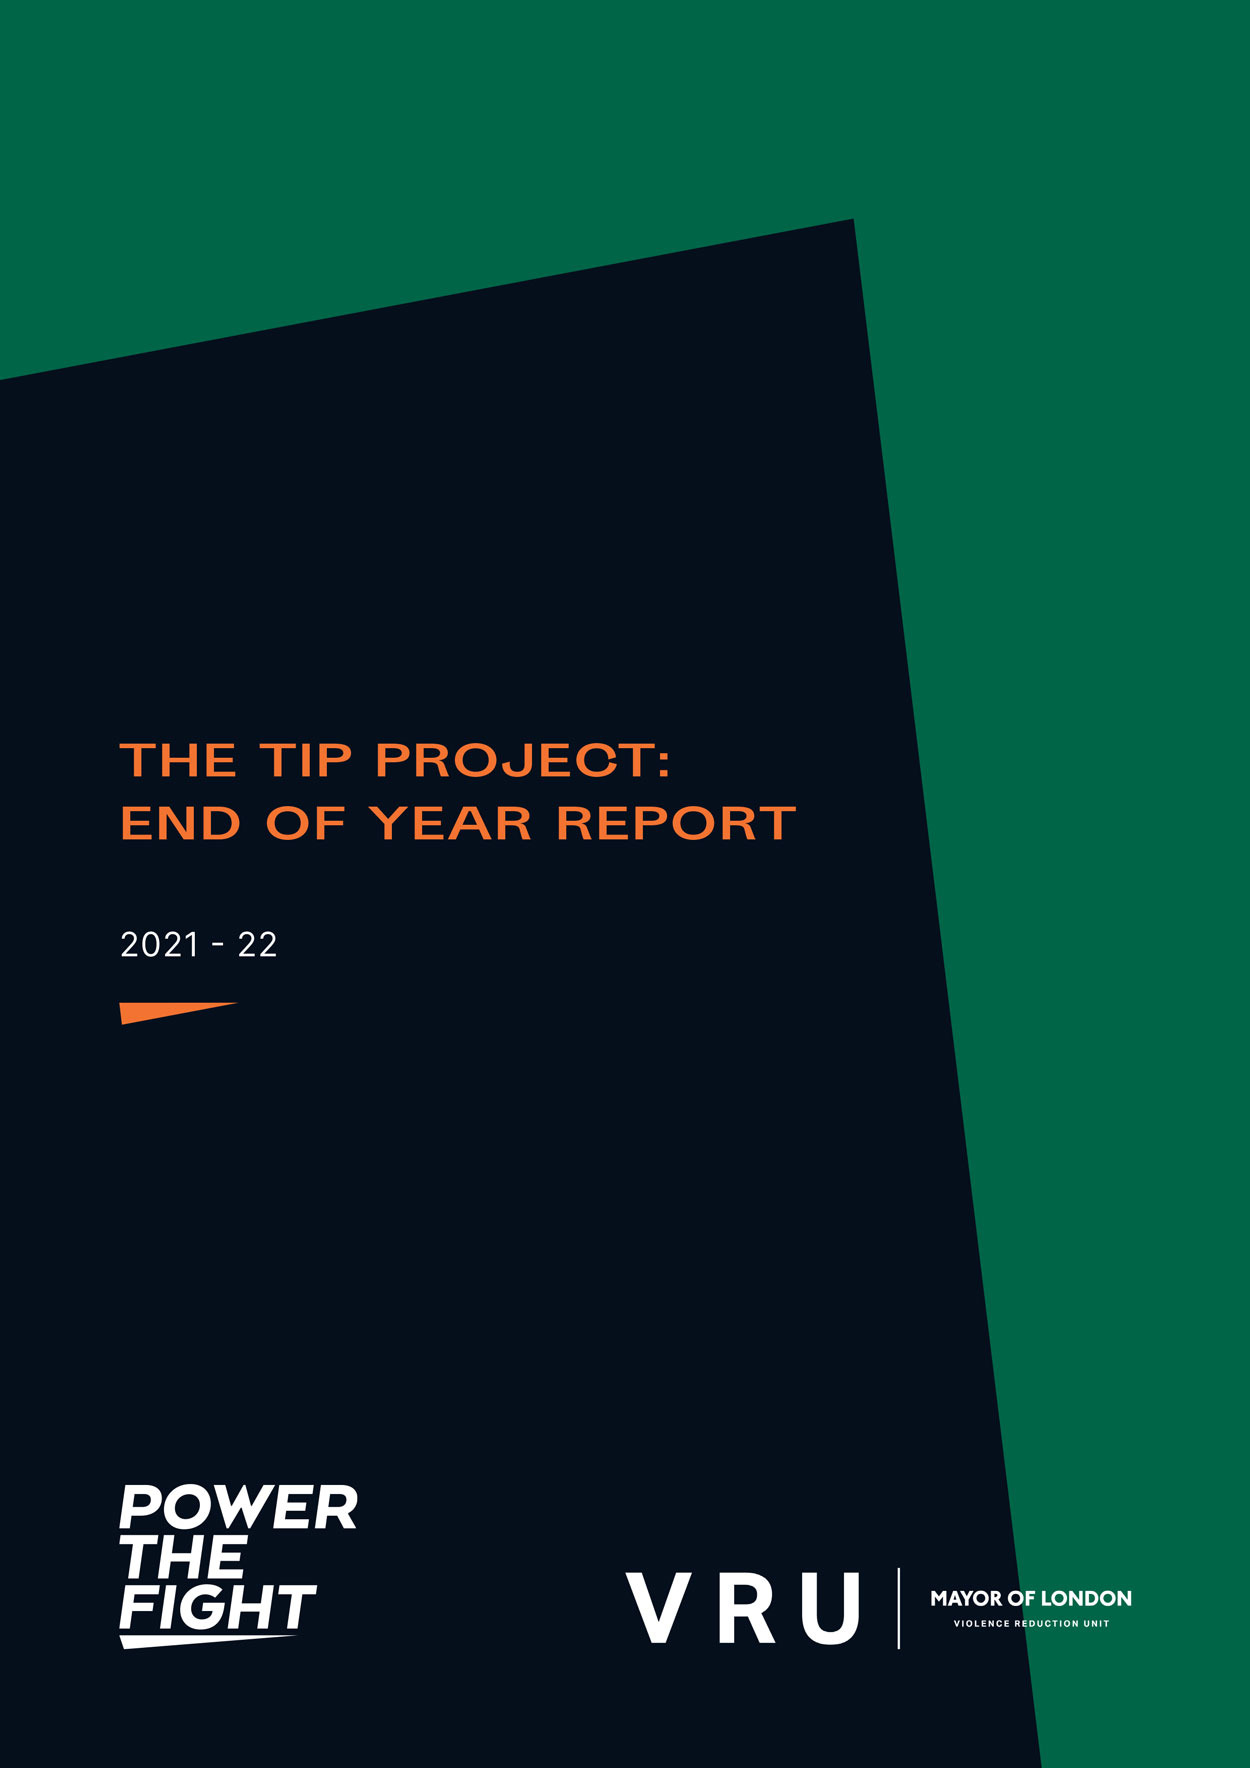 The TIP Project: End of Year Report